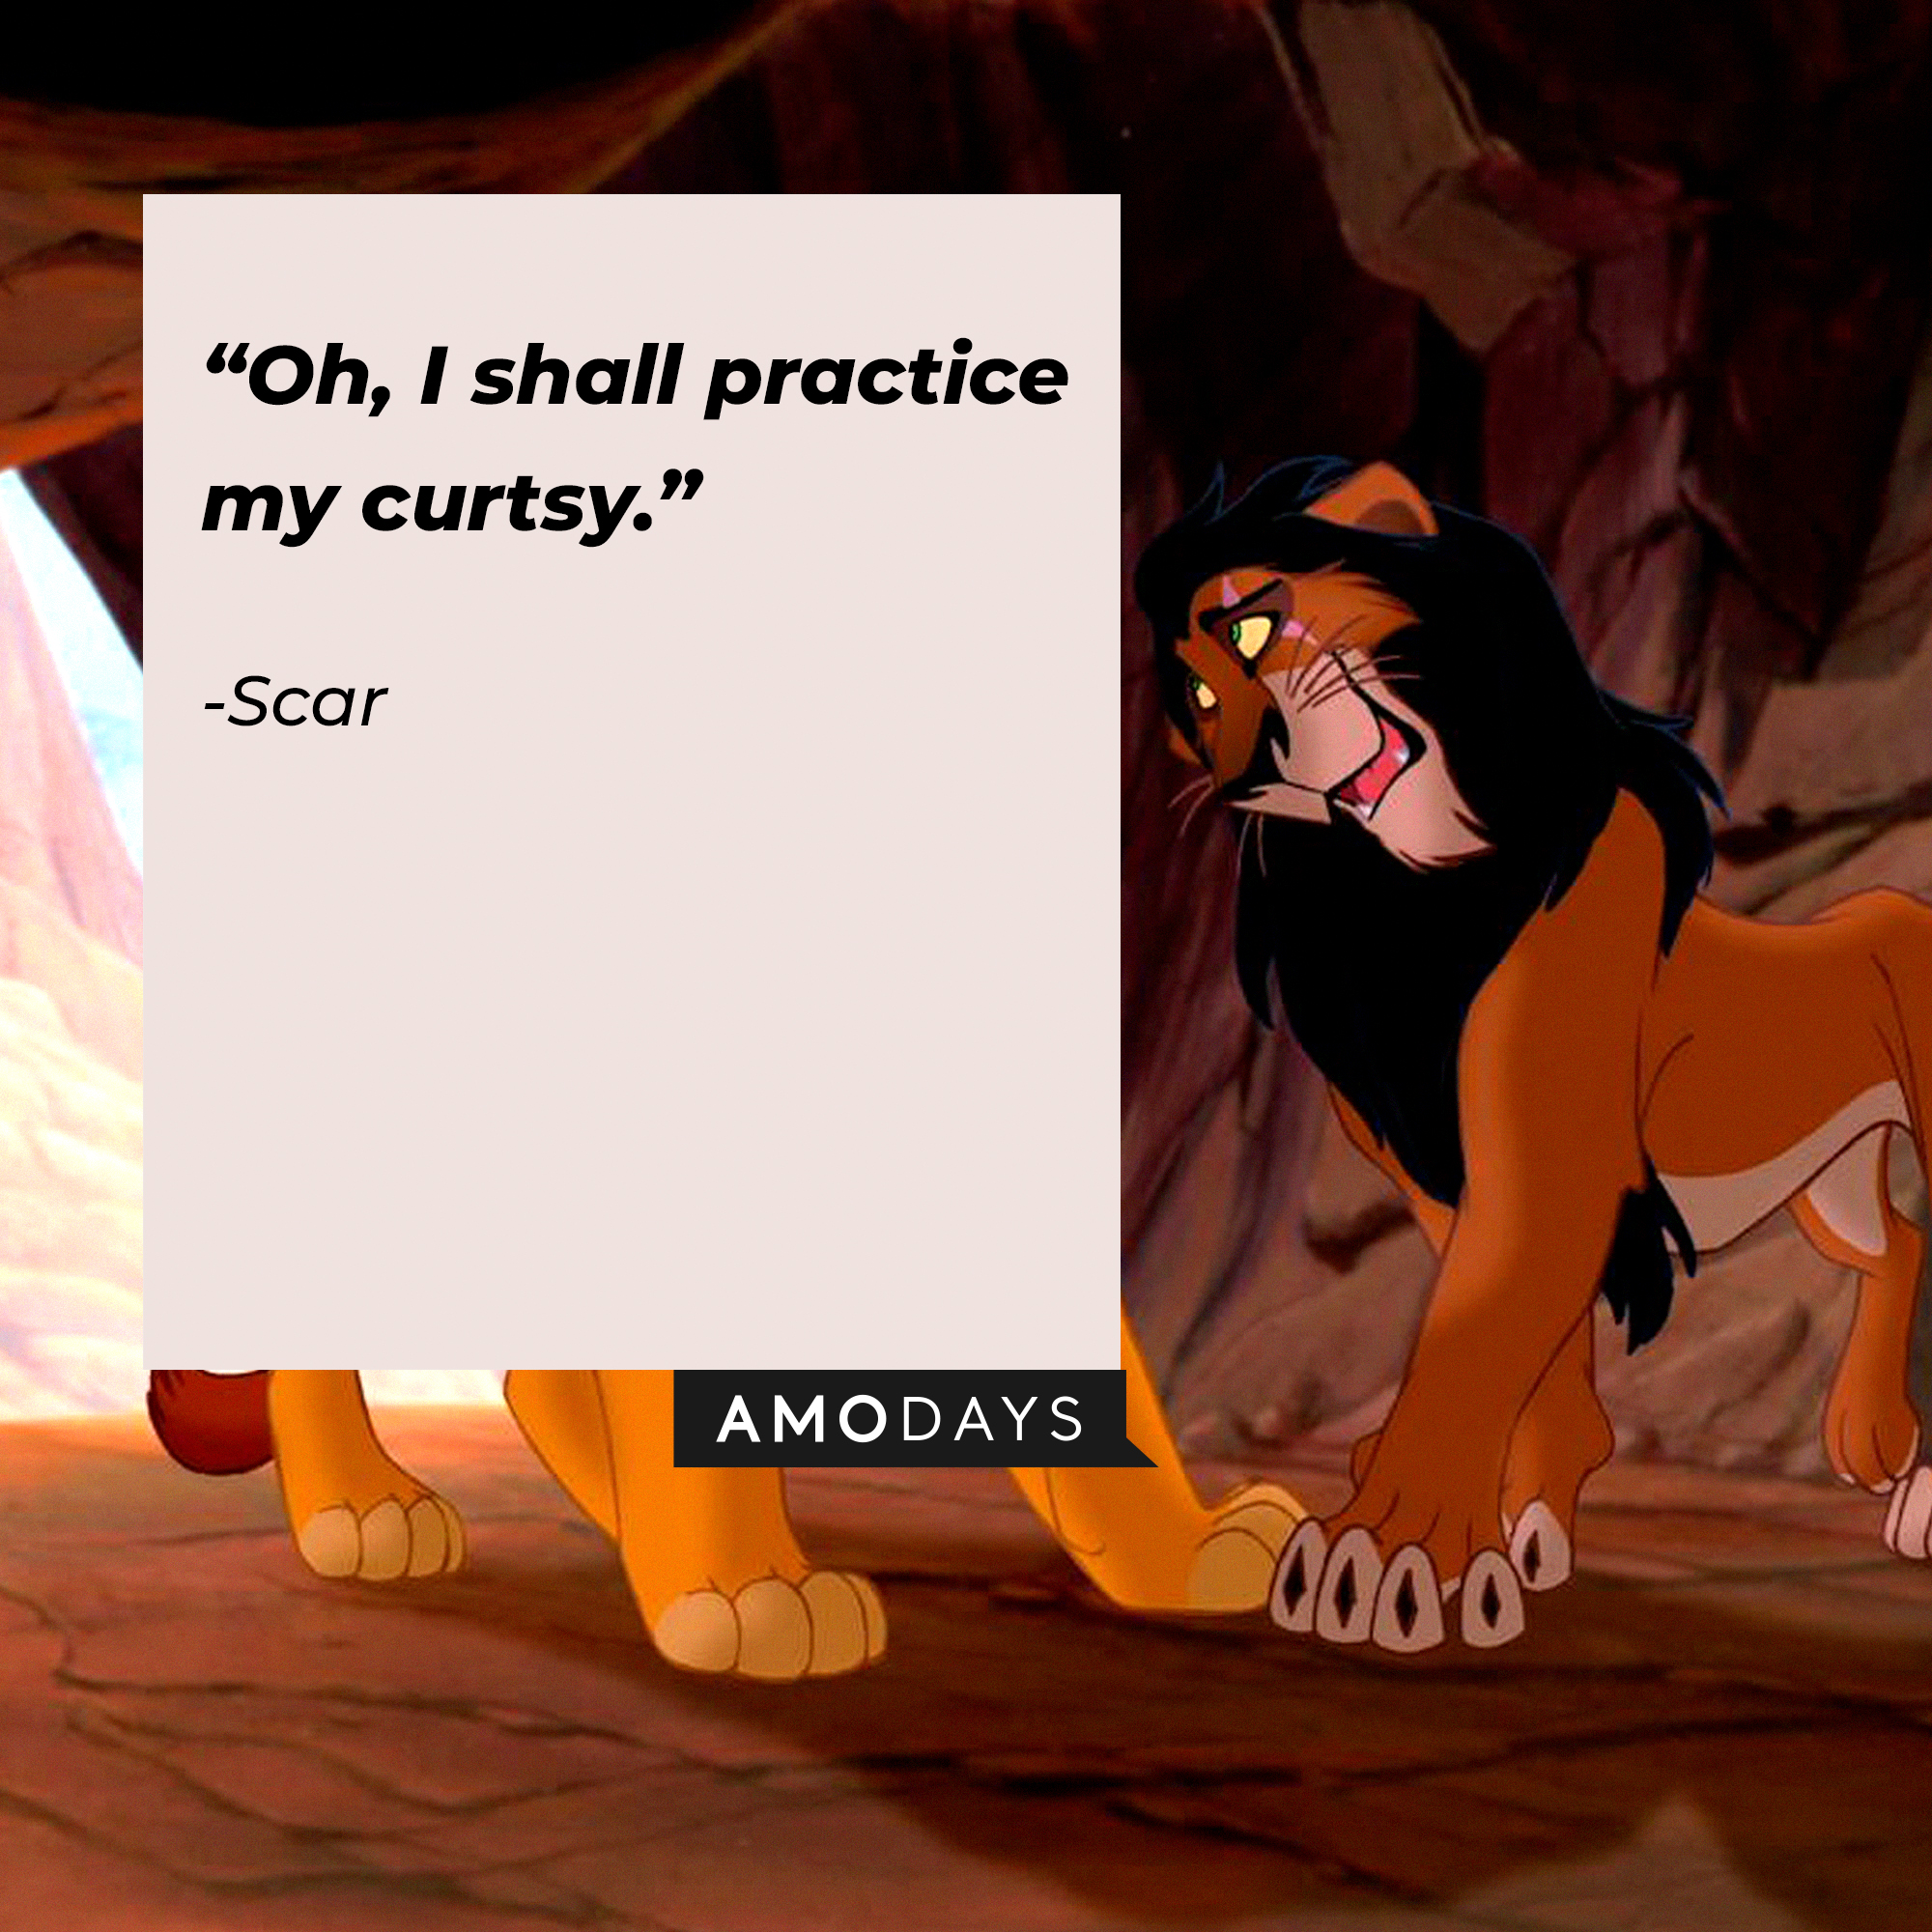 A photo of Scar with the quote, "Oh, I shall practice my curtsy." | Source: Facebook/DisneyTheLionKing